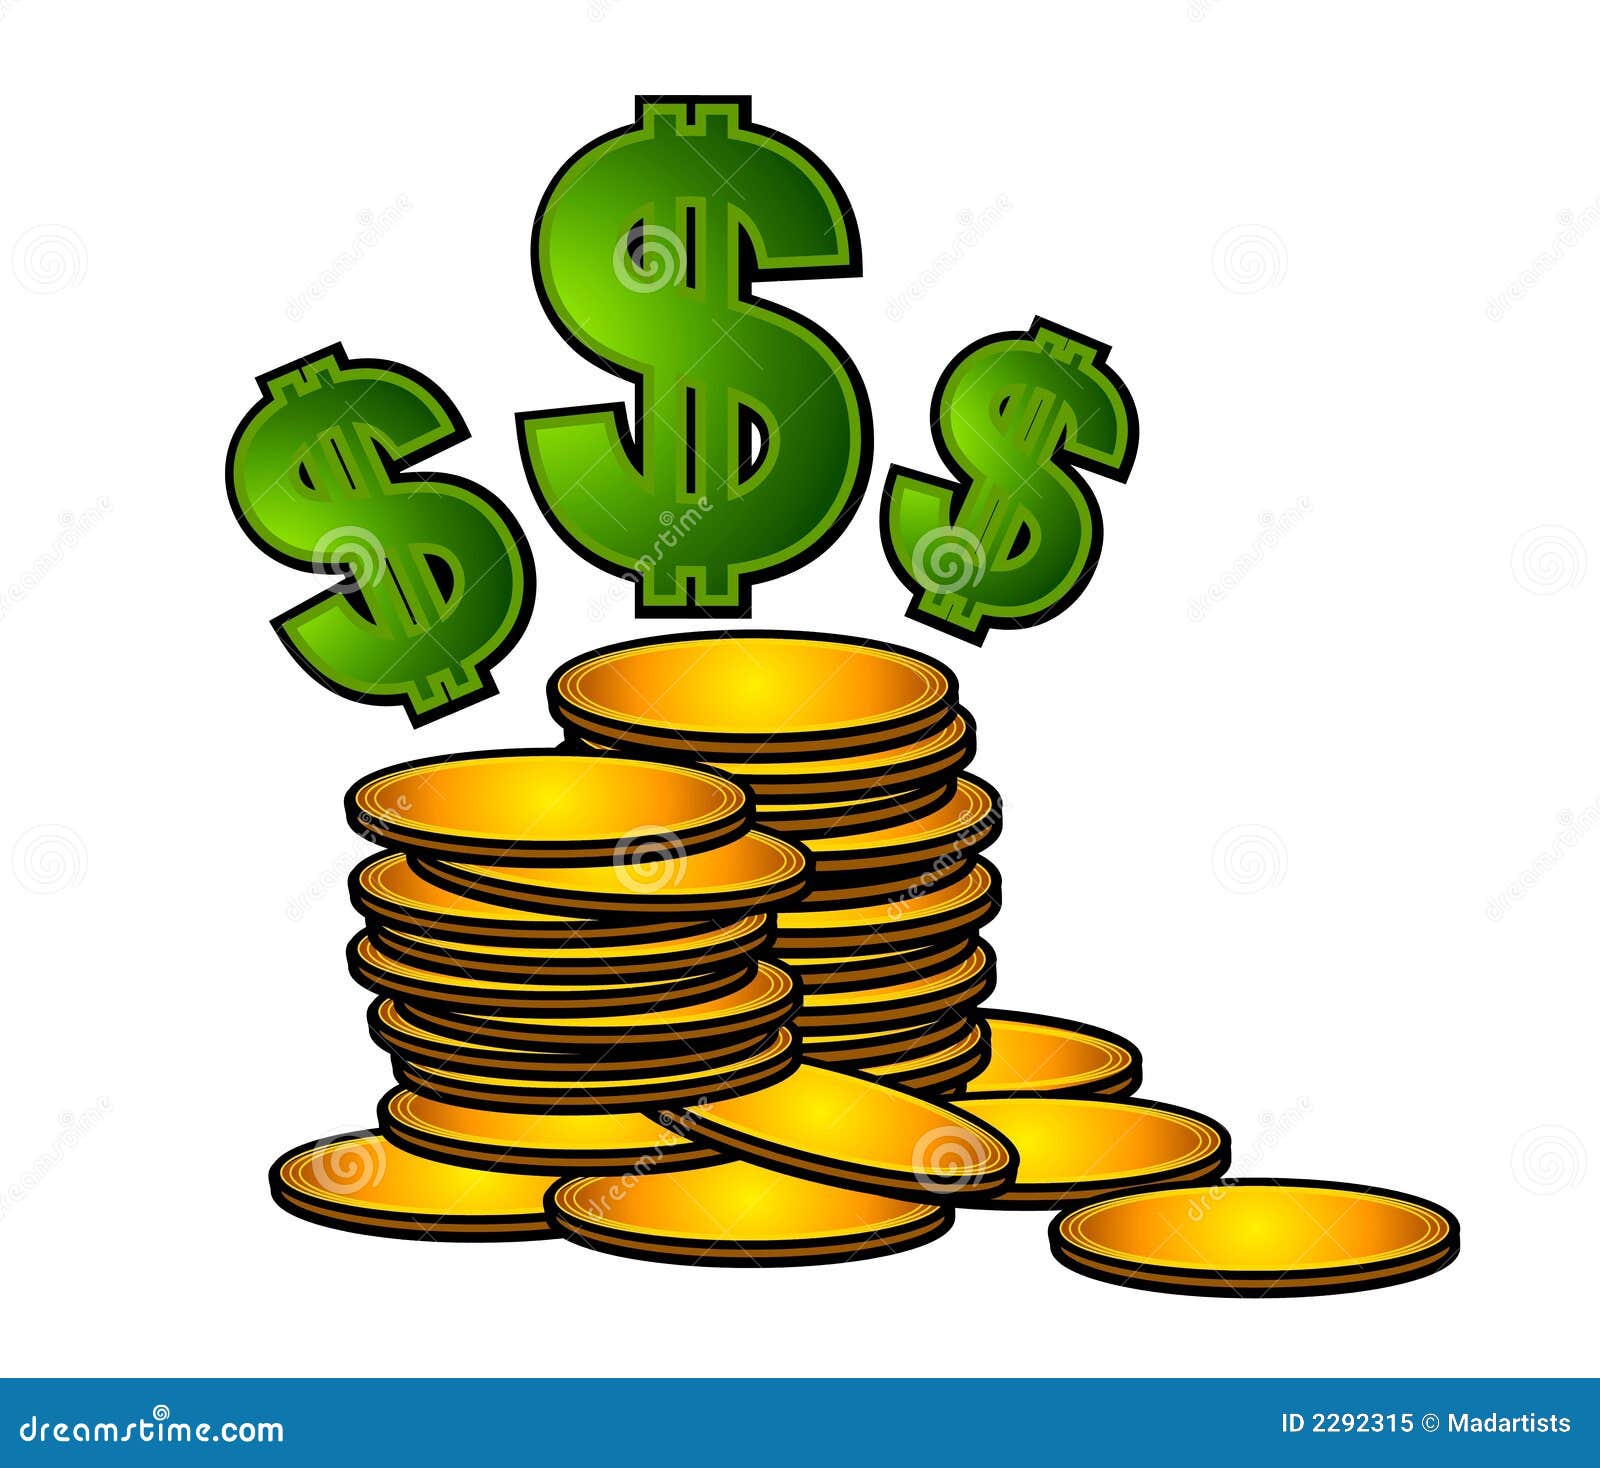 clipart of money signs - photo #40